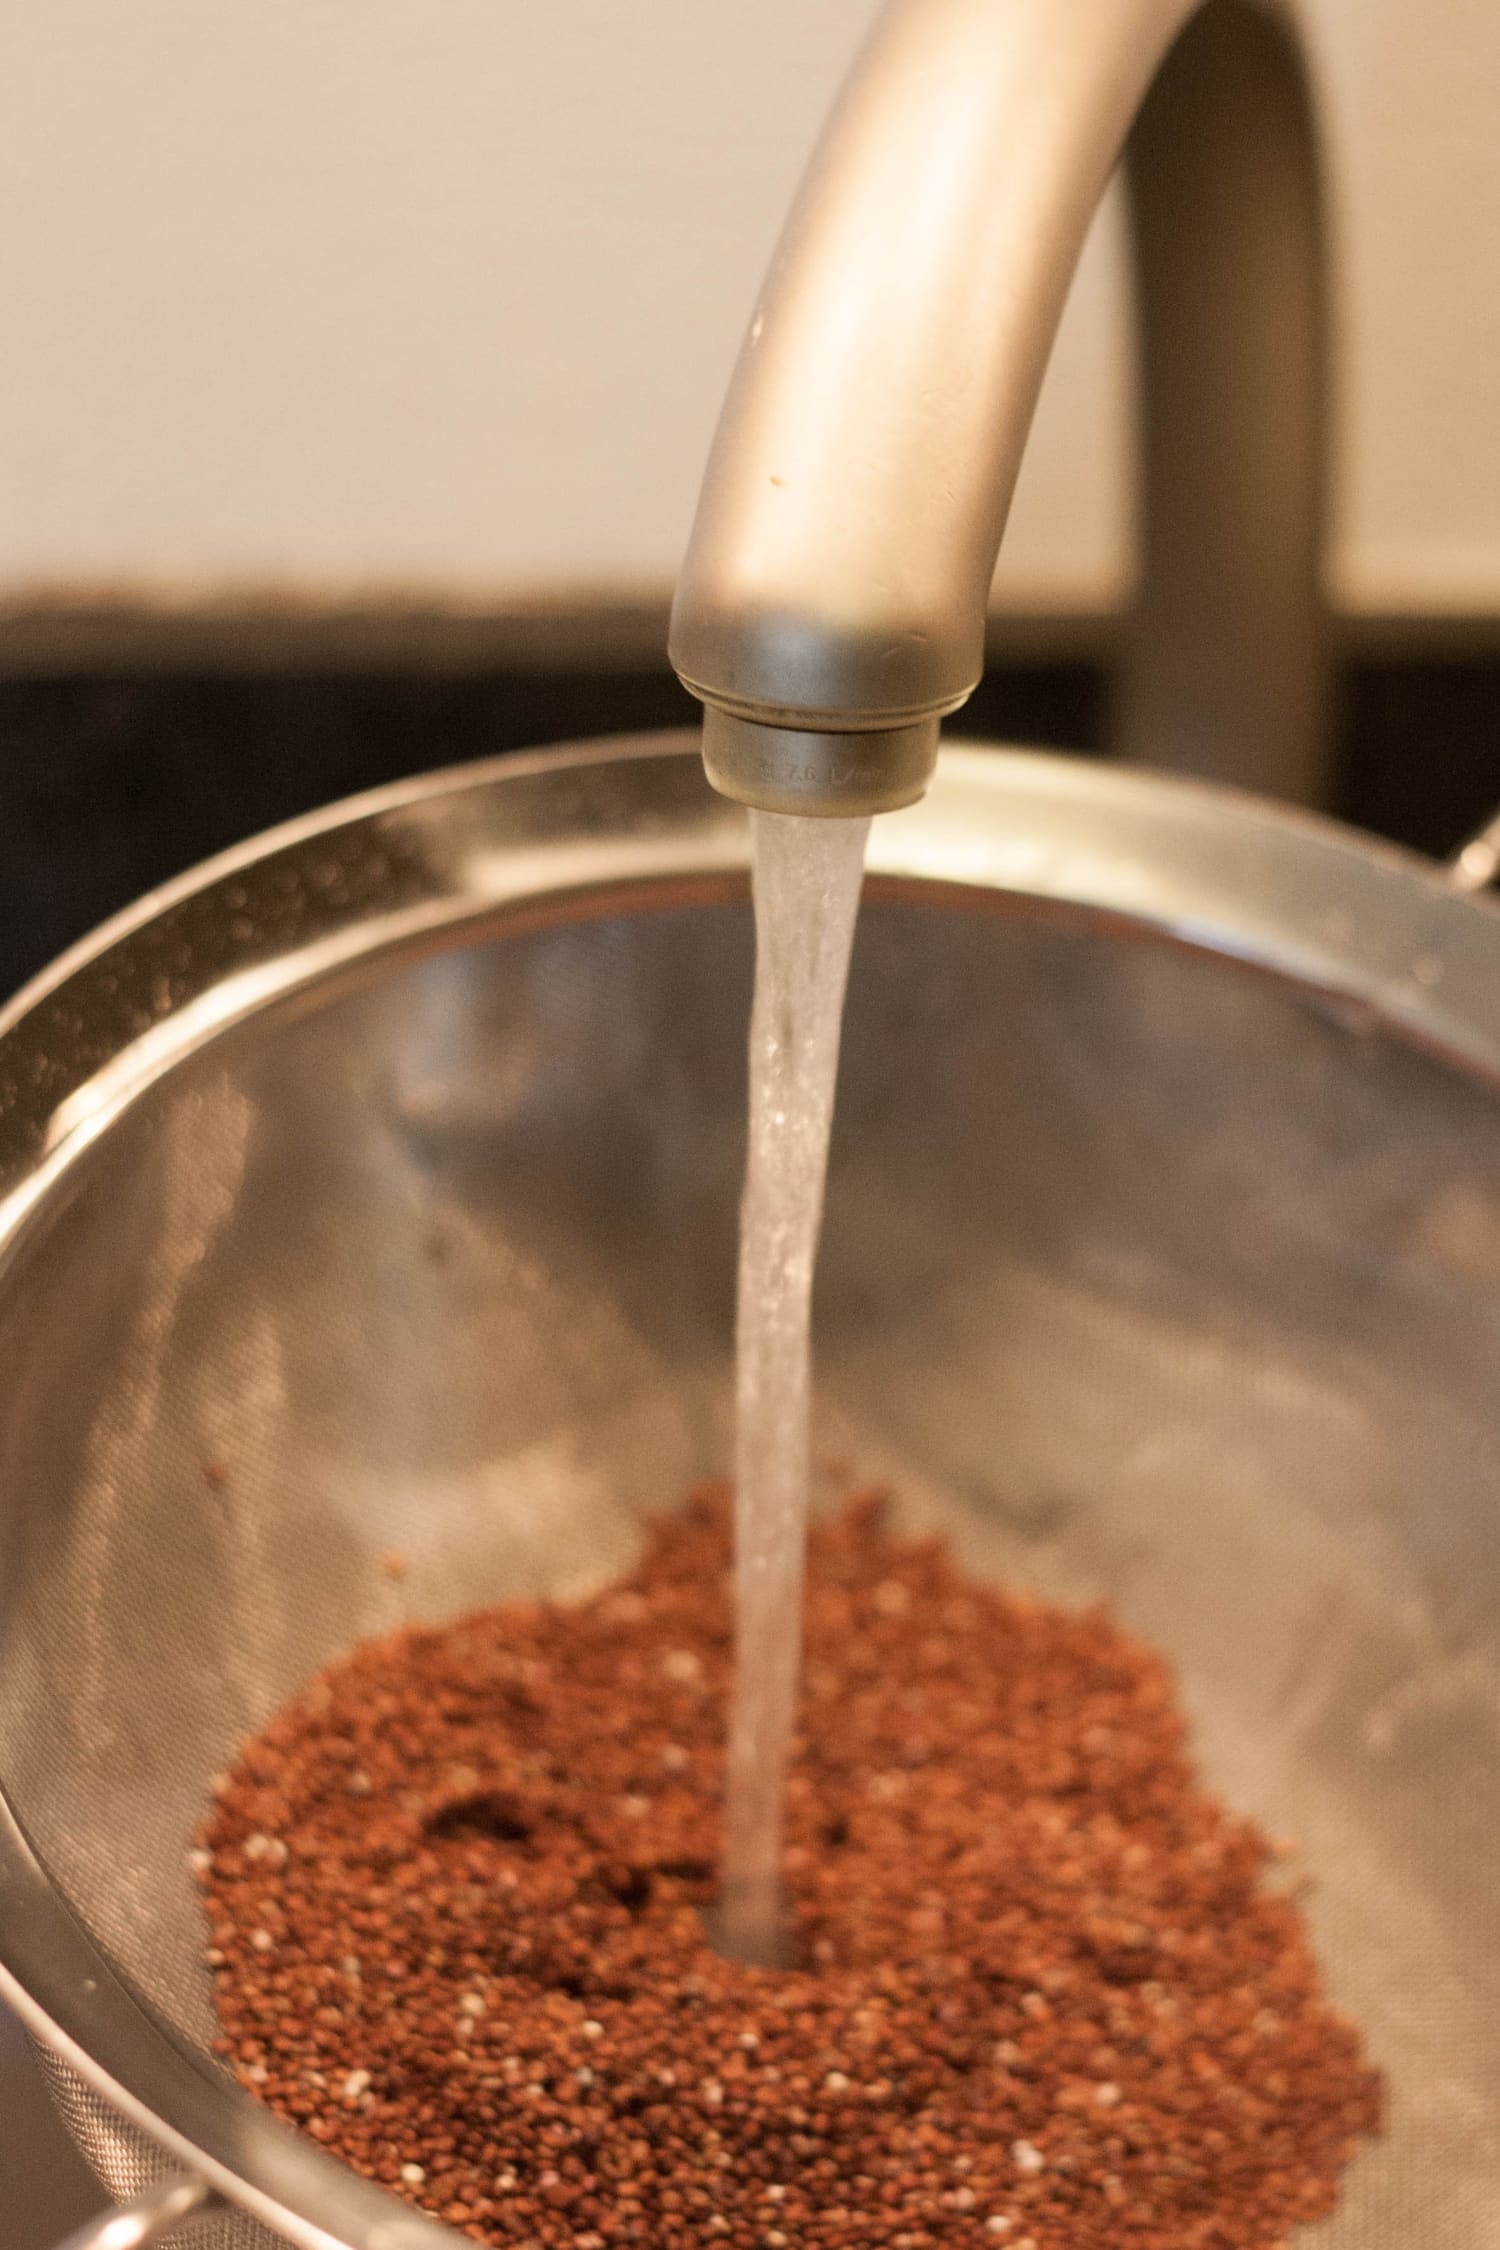 Do You Really Need to Rinse Quinoa Before Cooking It?